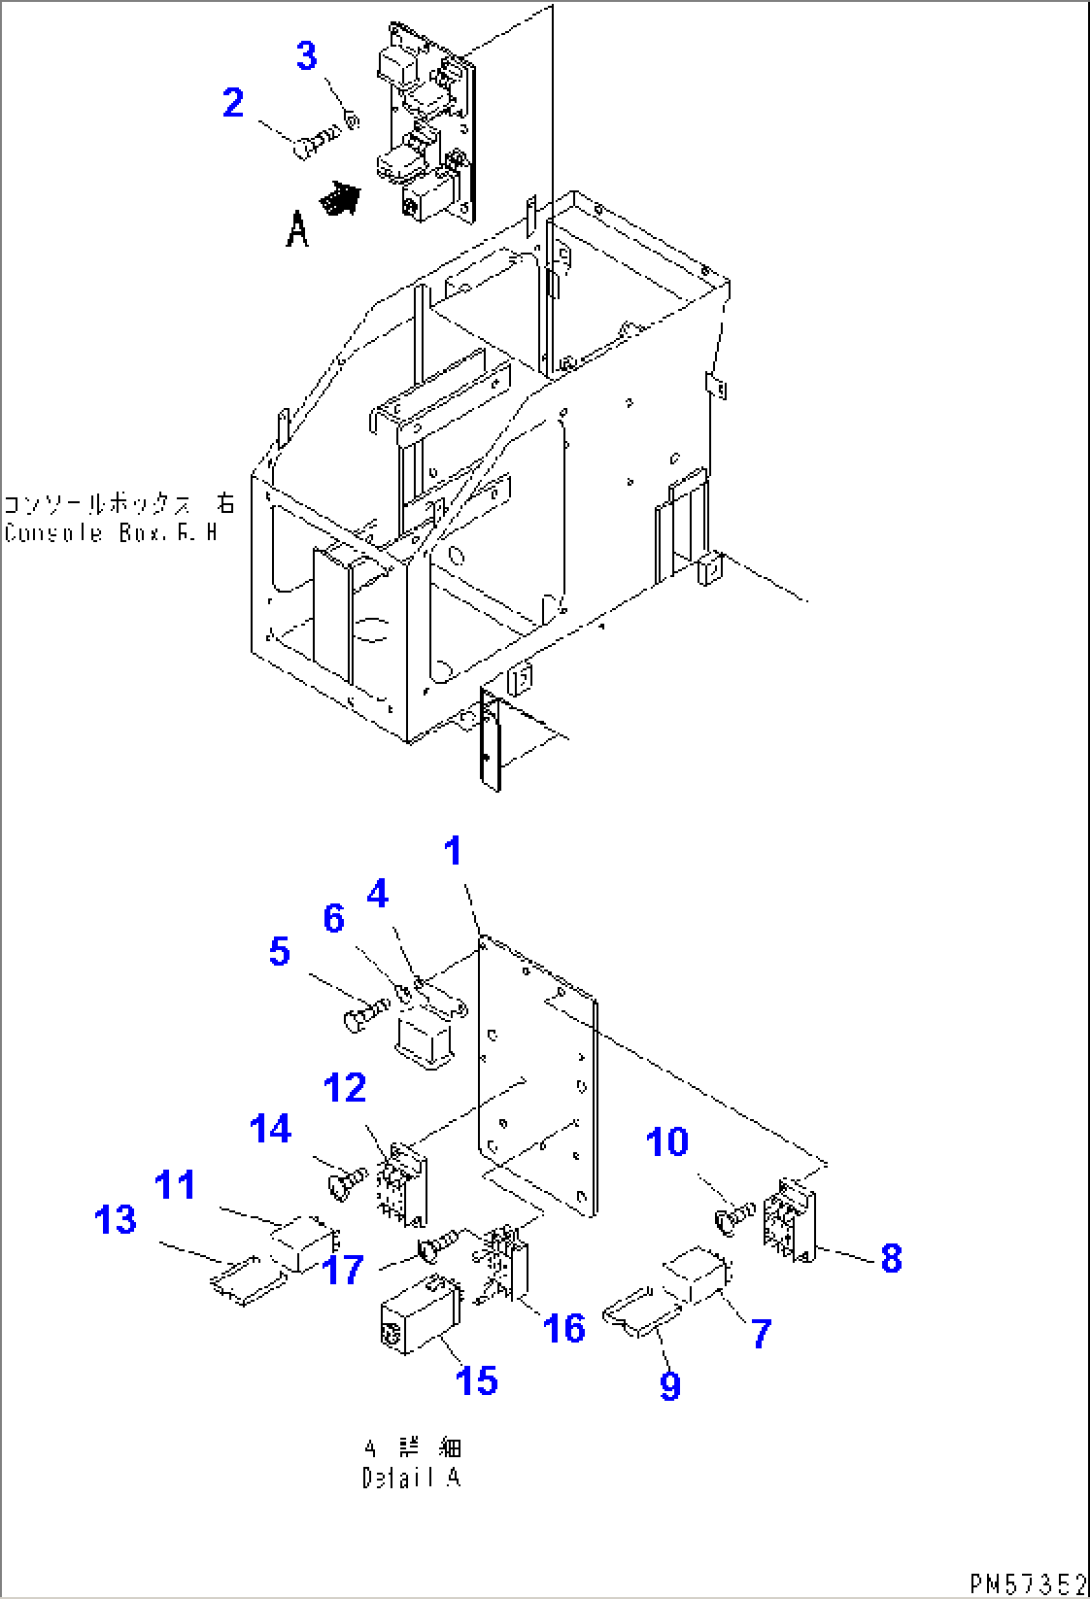 ELECTRICAL SYSTEM (CONSOLE BOX LINE) (1/4)